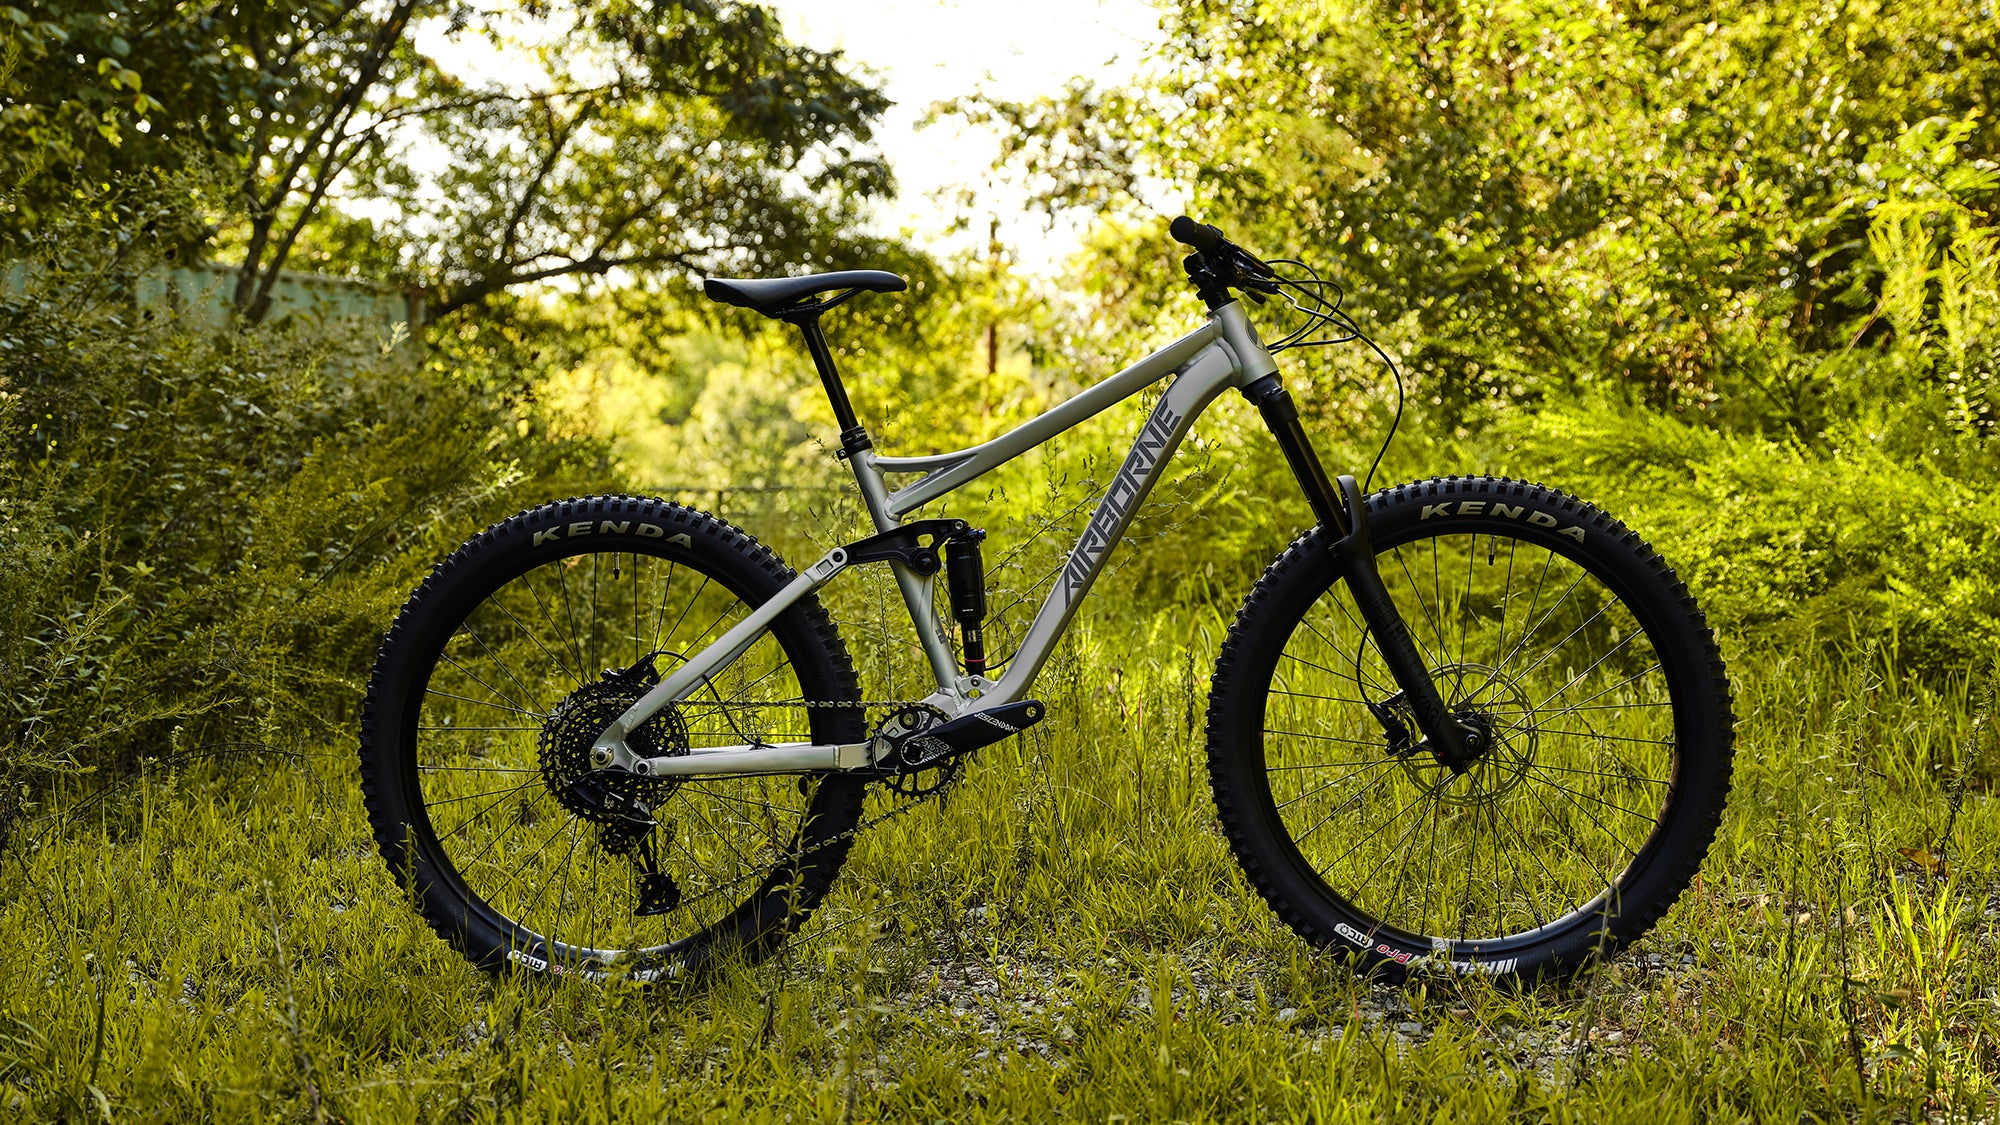 Go Anywhere On The Plague 27.5” Full Suspension Enduro